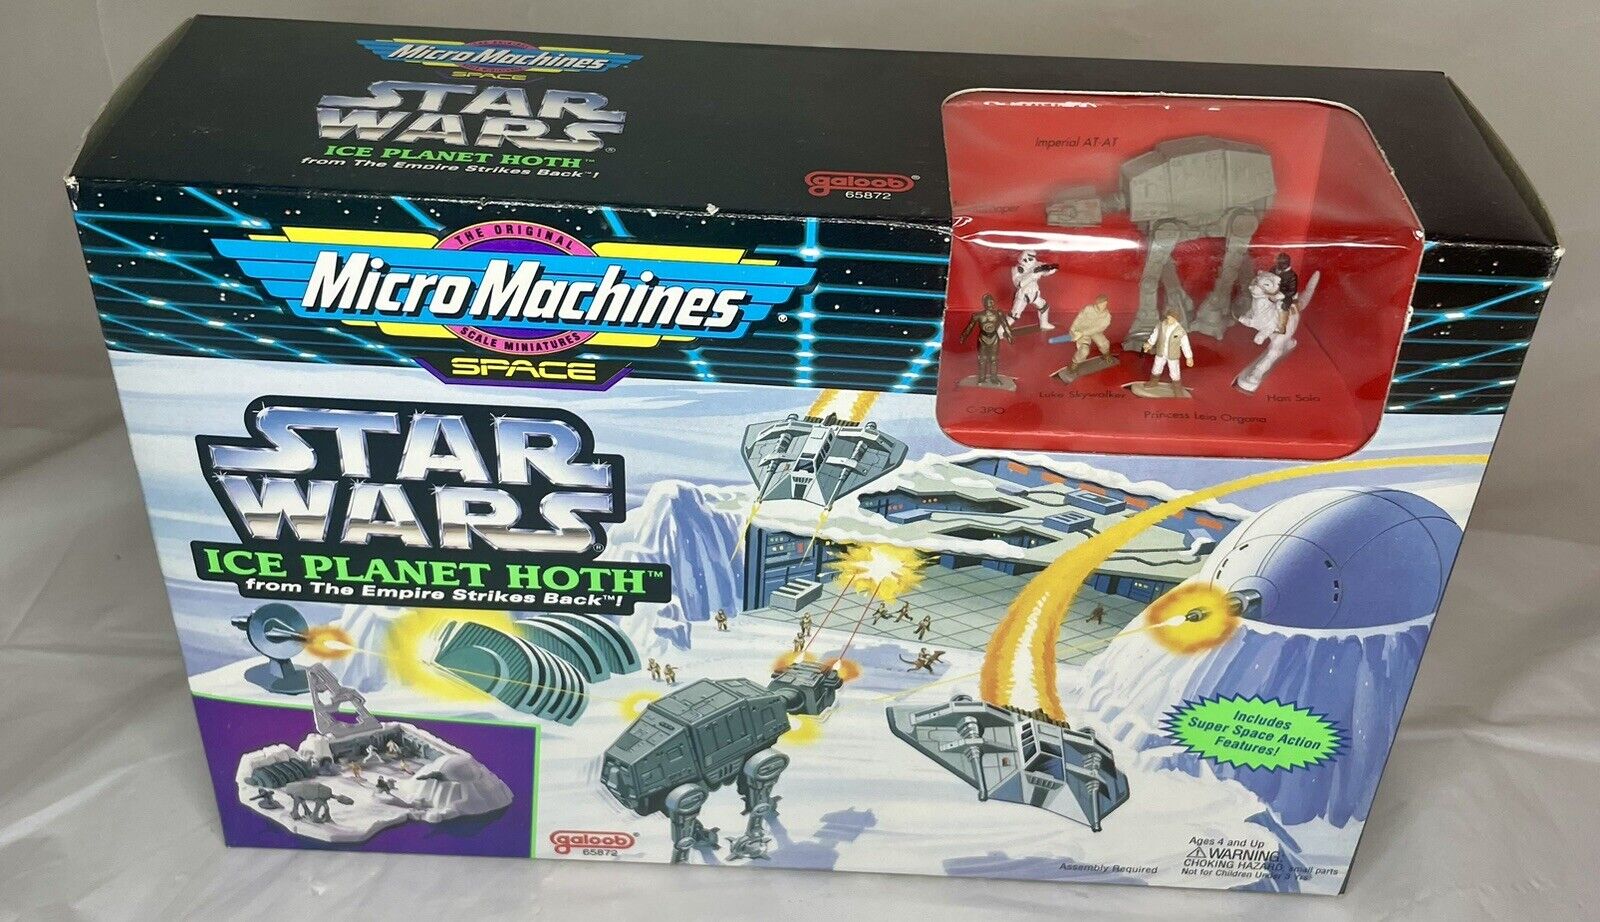 Micro Machines Star Wars Ice Planet Hoth Playset - Galoob, 1993, New/Sealed Box